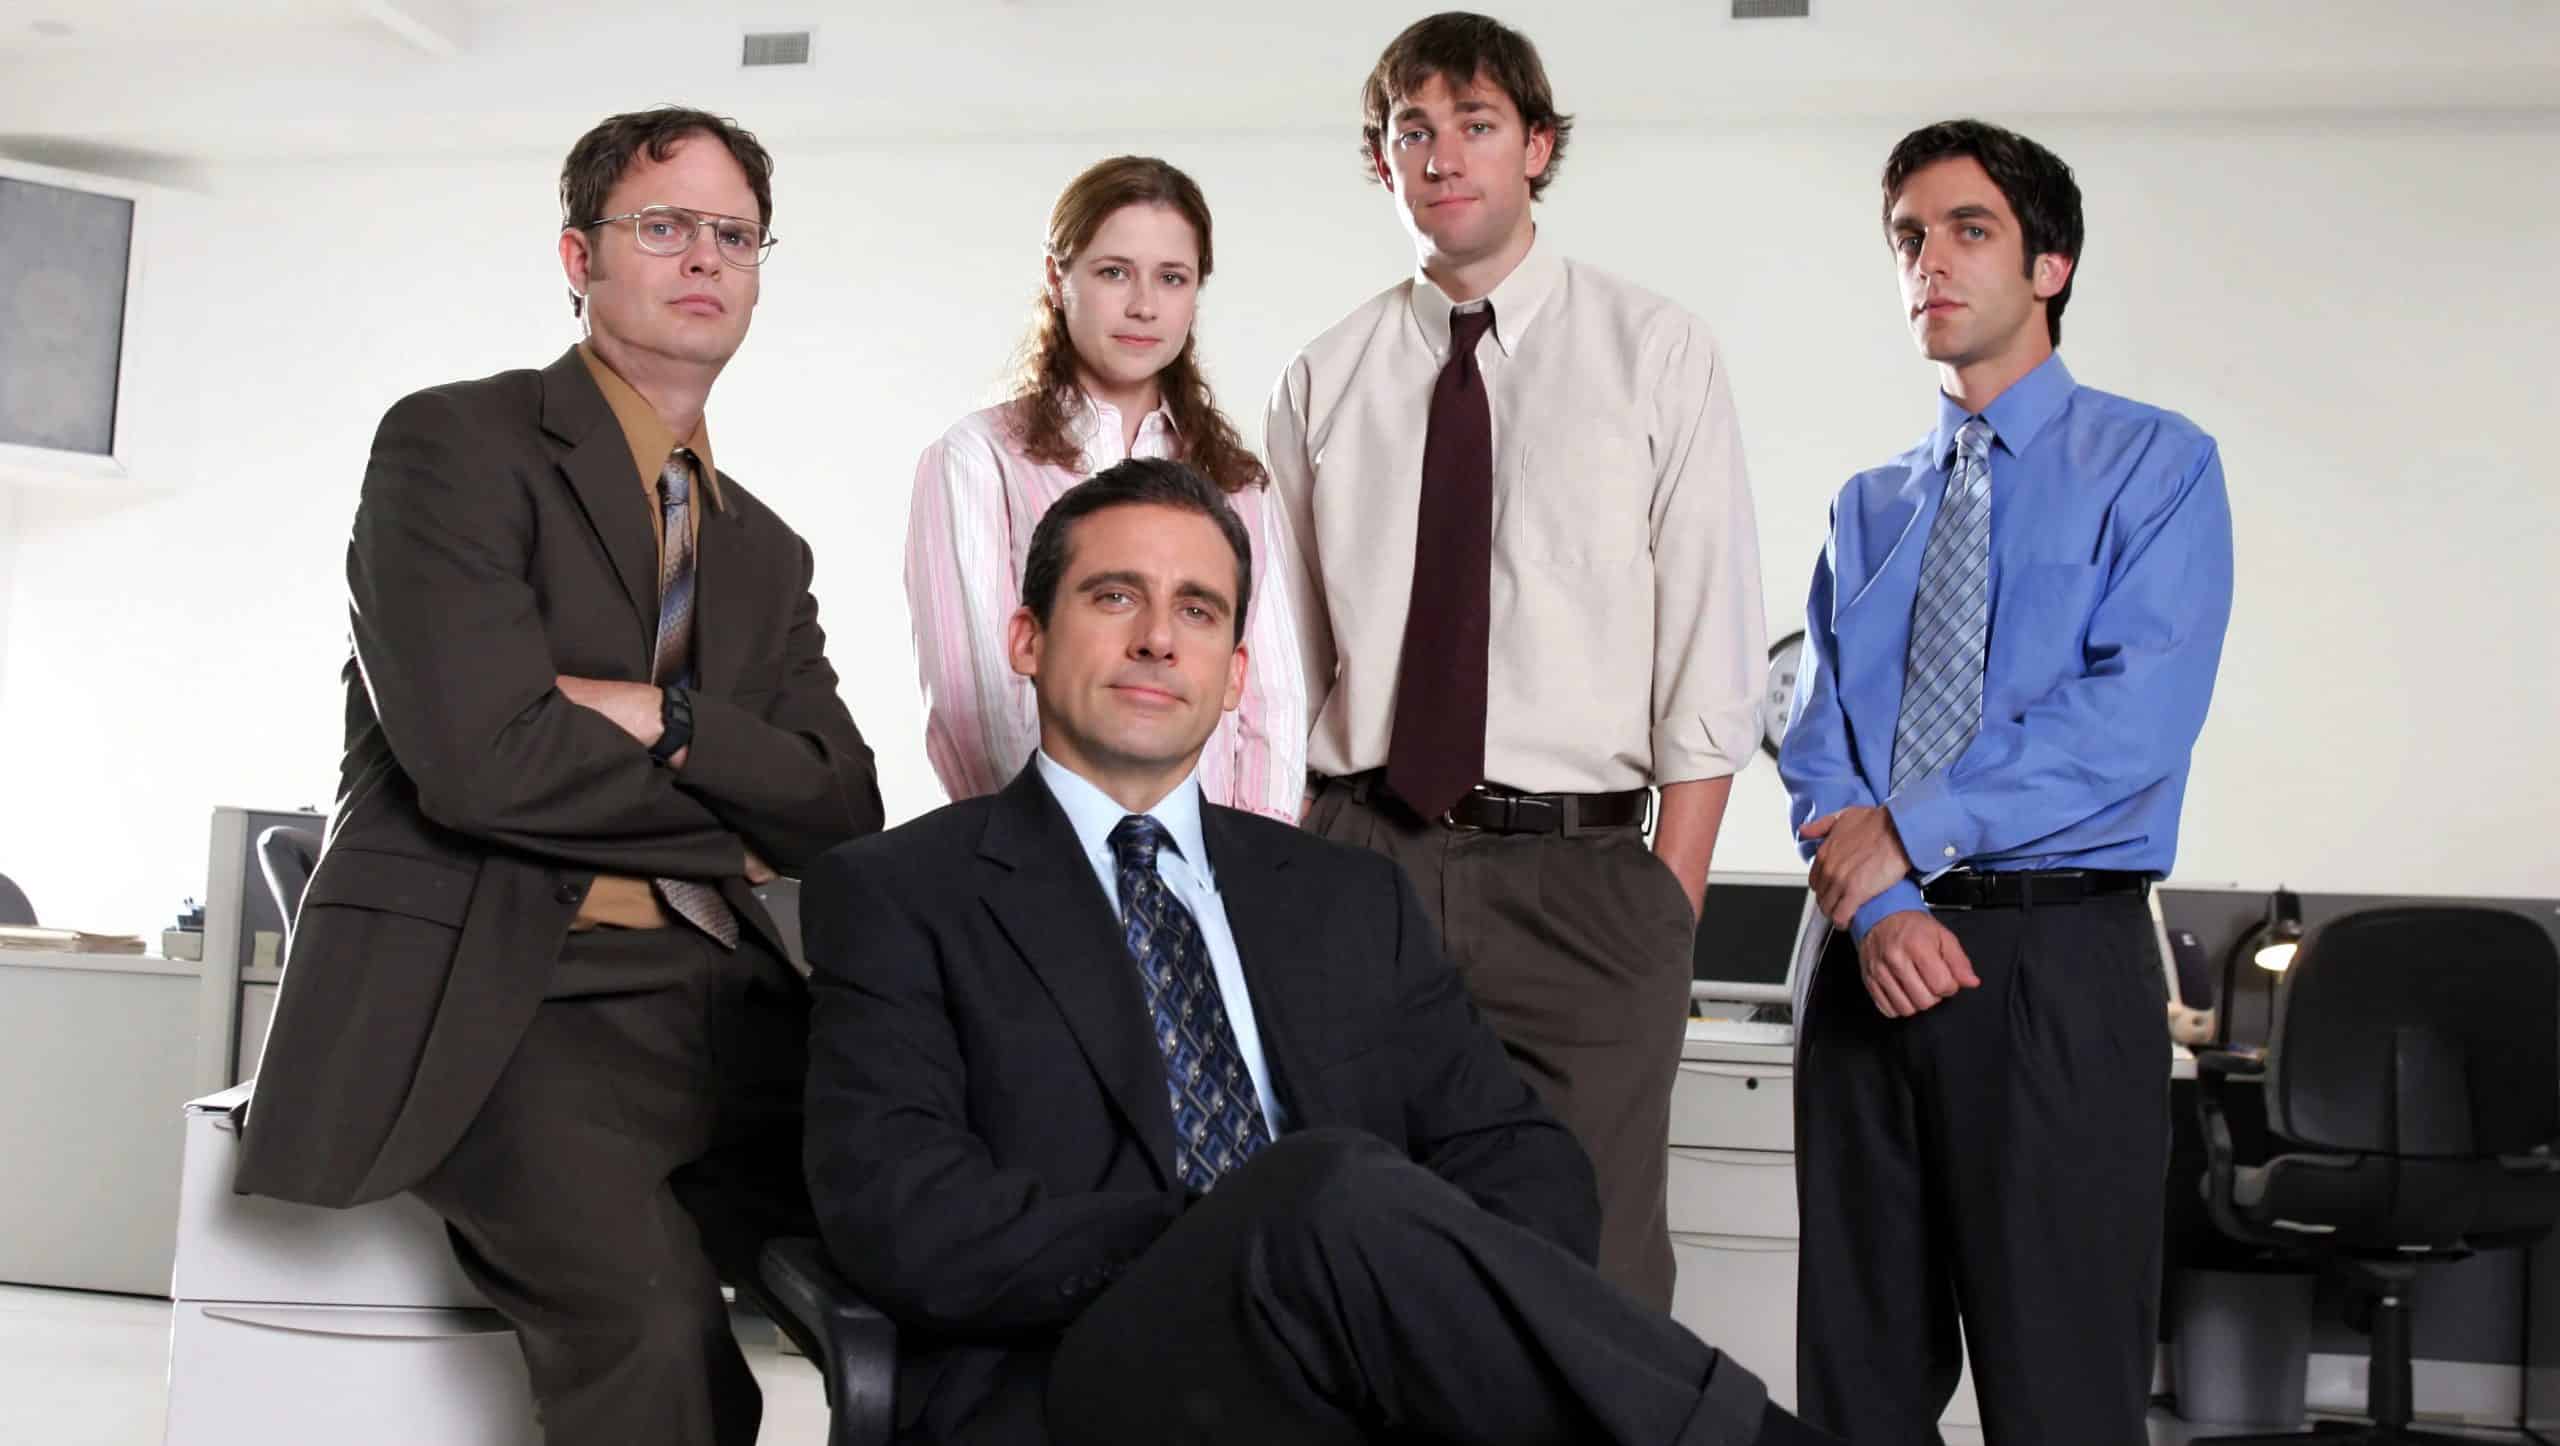 Steve Carell with the cast of the show, The Office